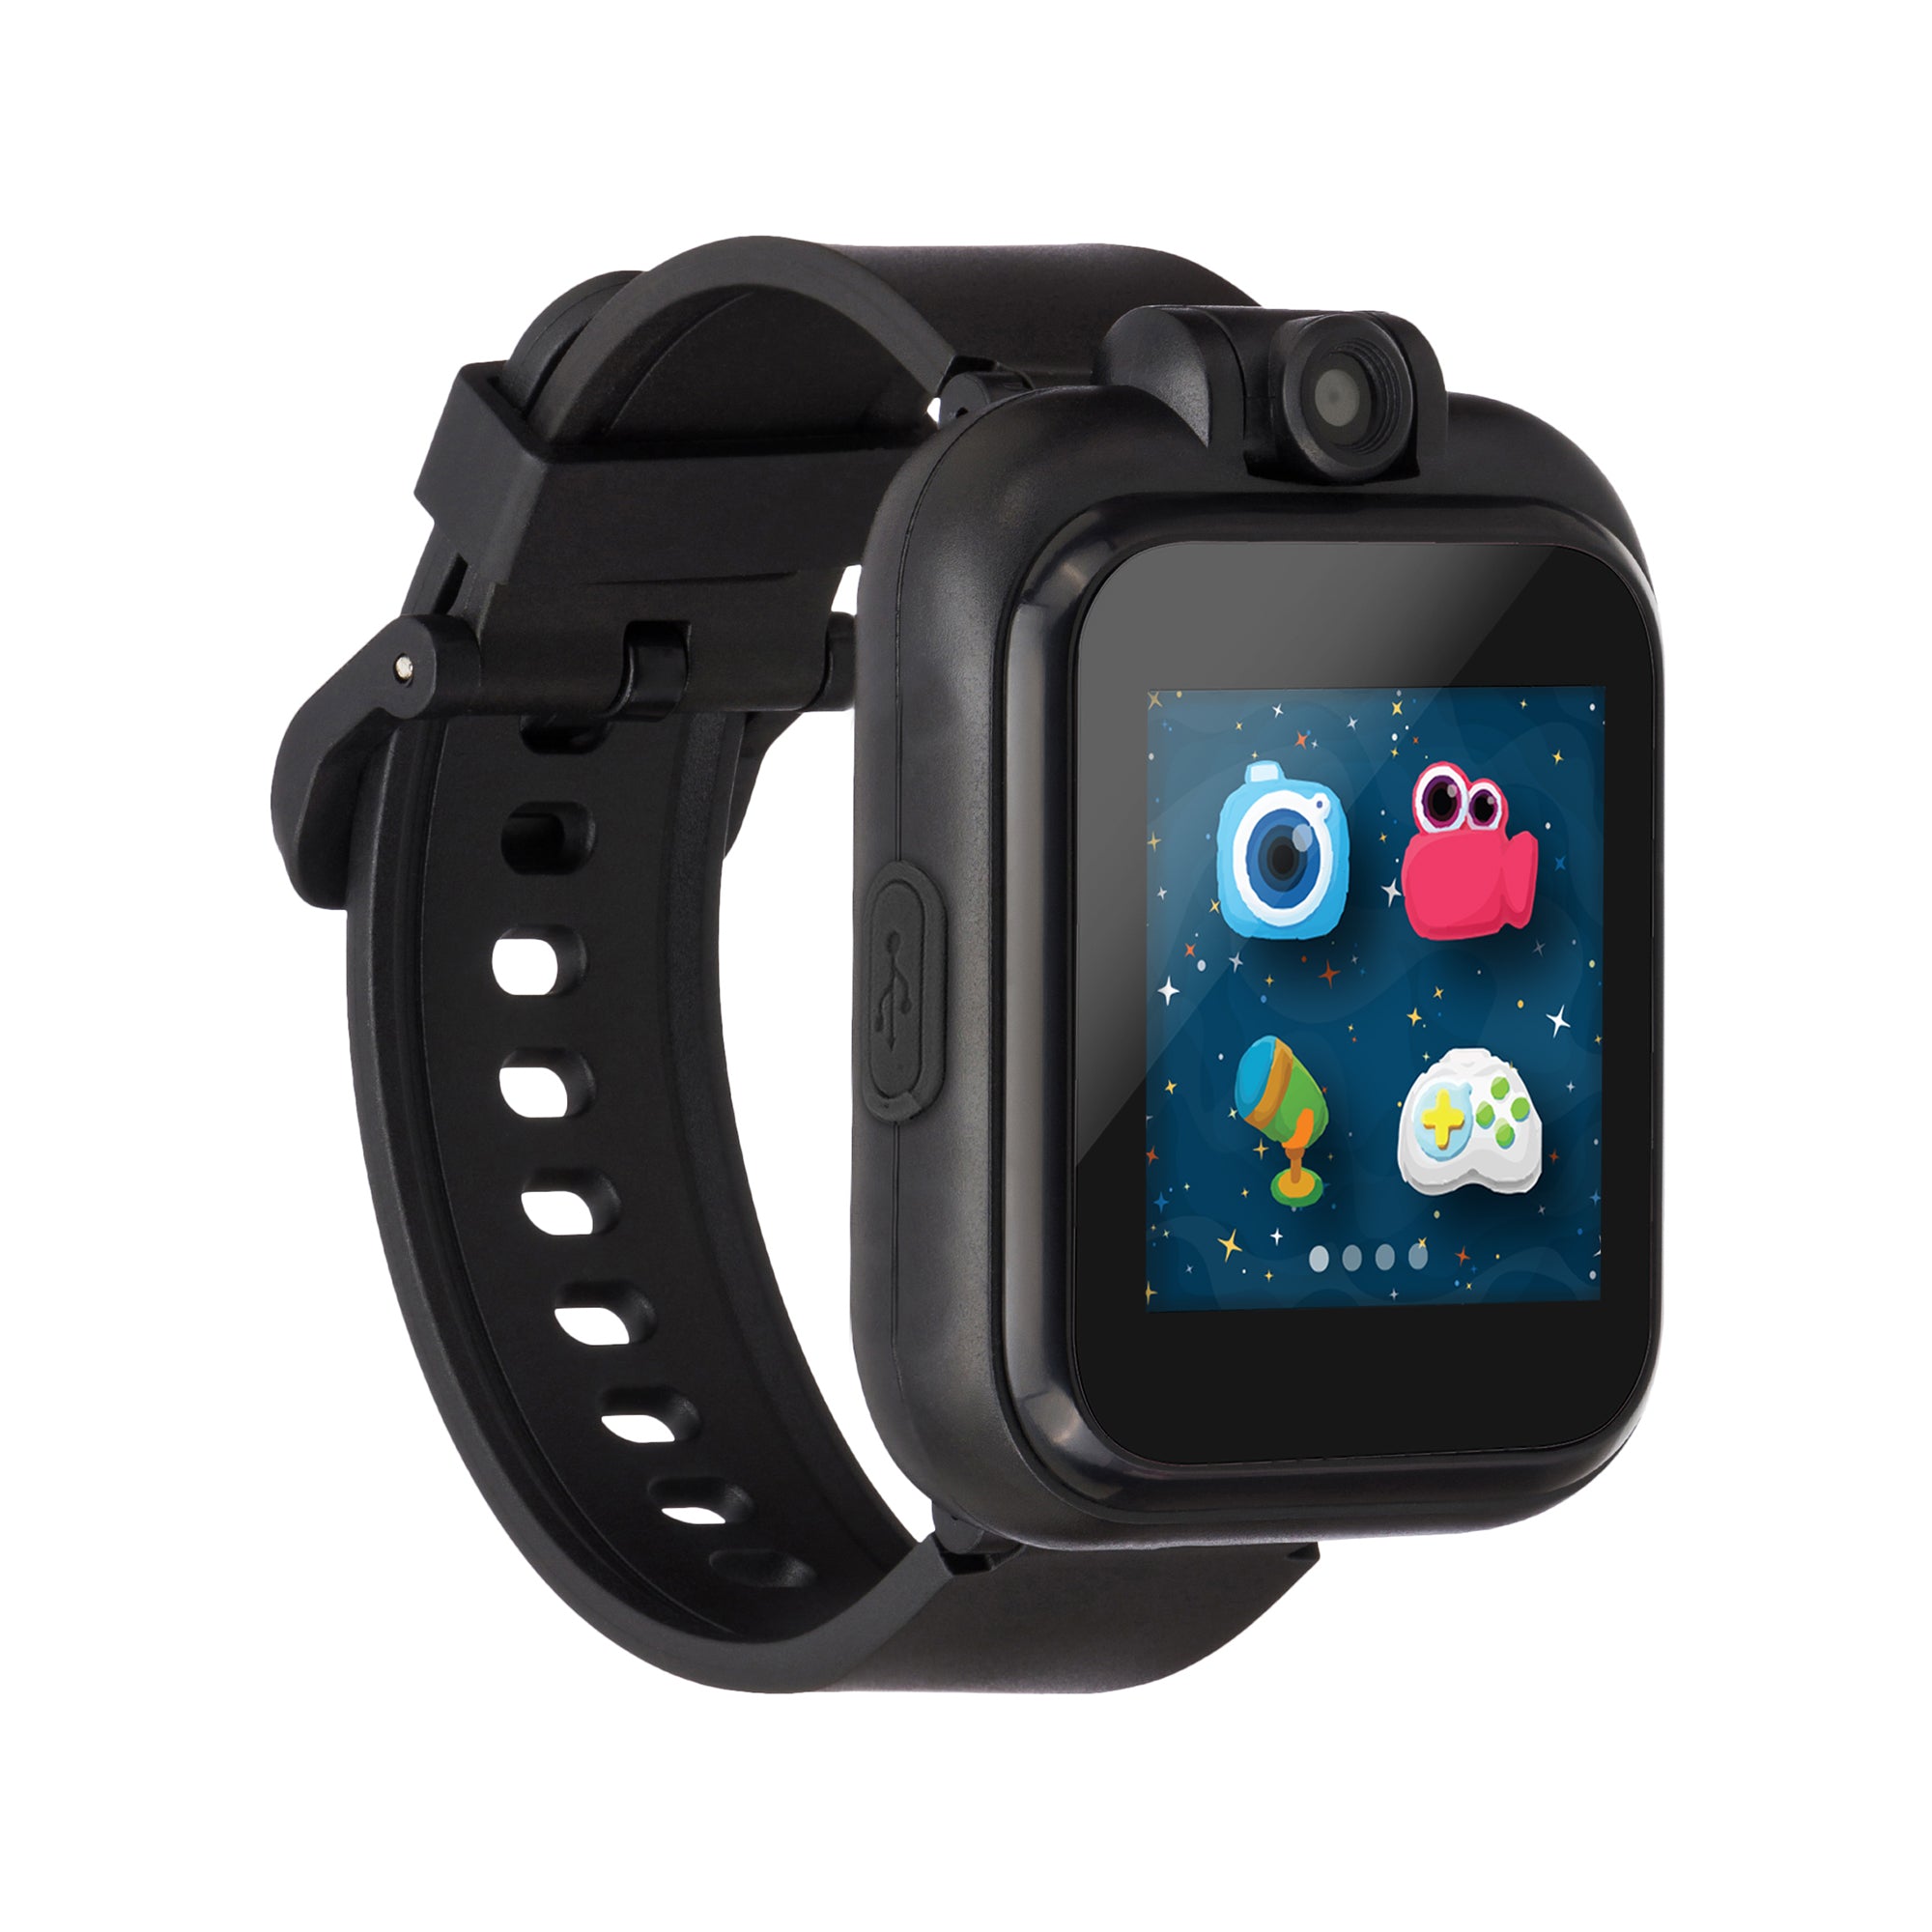 S19 1.7-inch HD Large-Screen Smart Watch Touch Control Children Watch  Built-In Puzzle Games - Black Wholesale